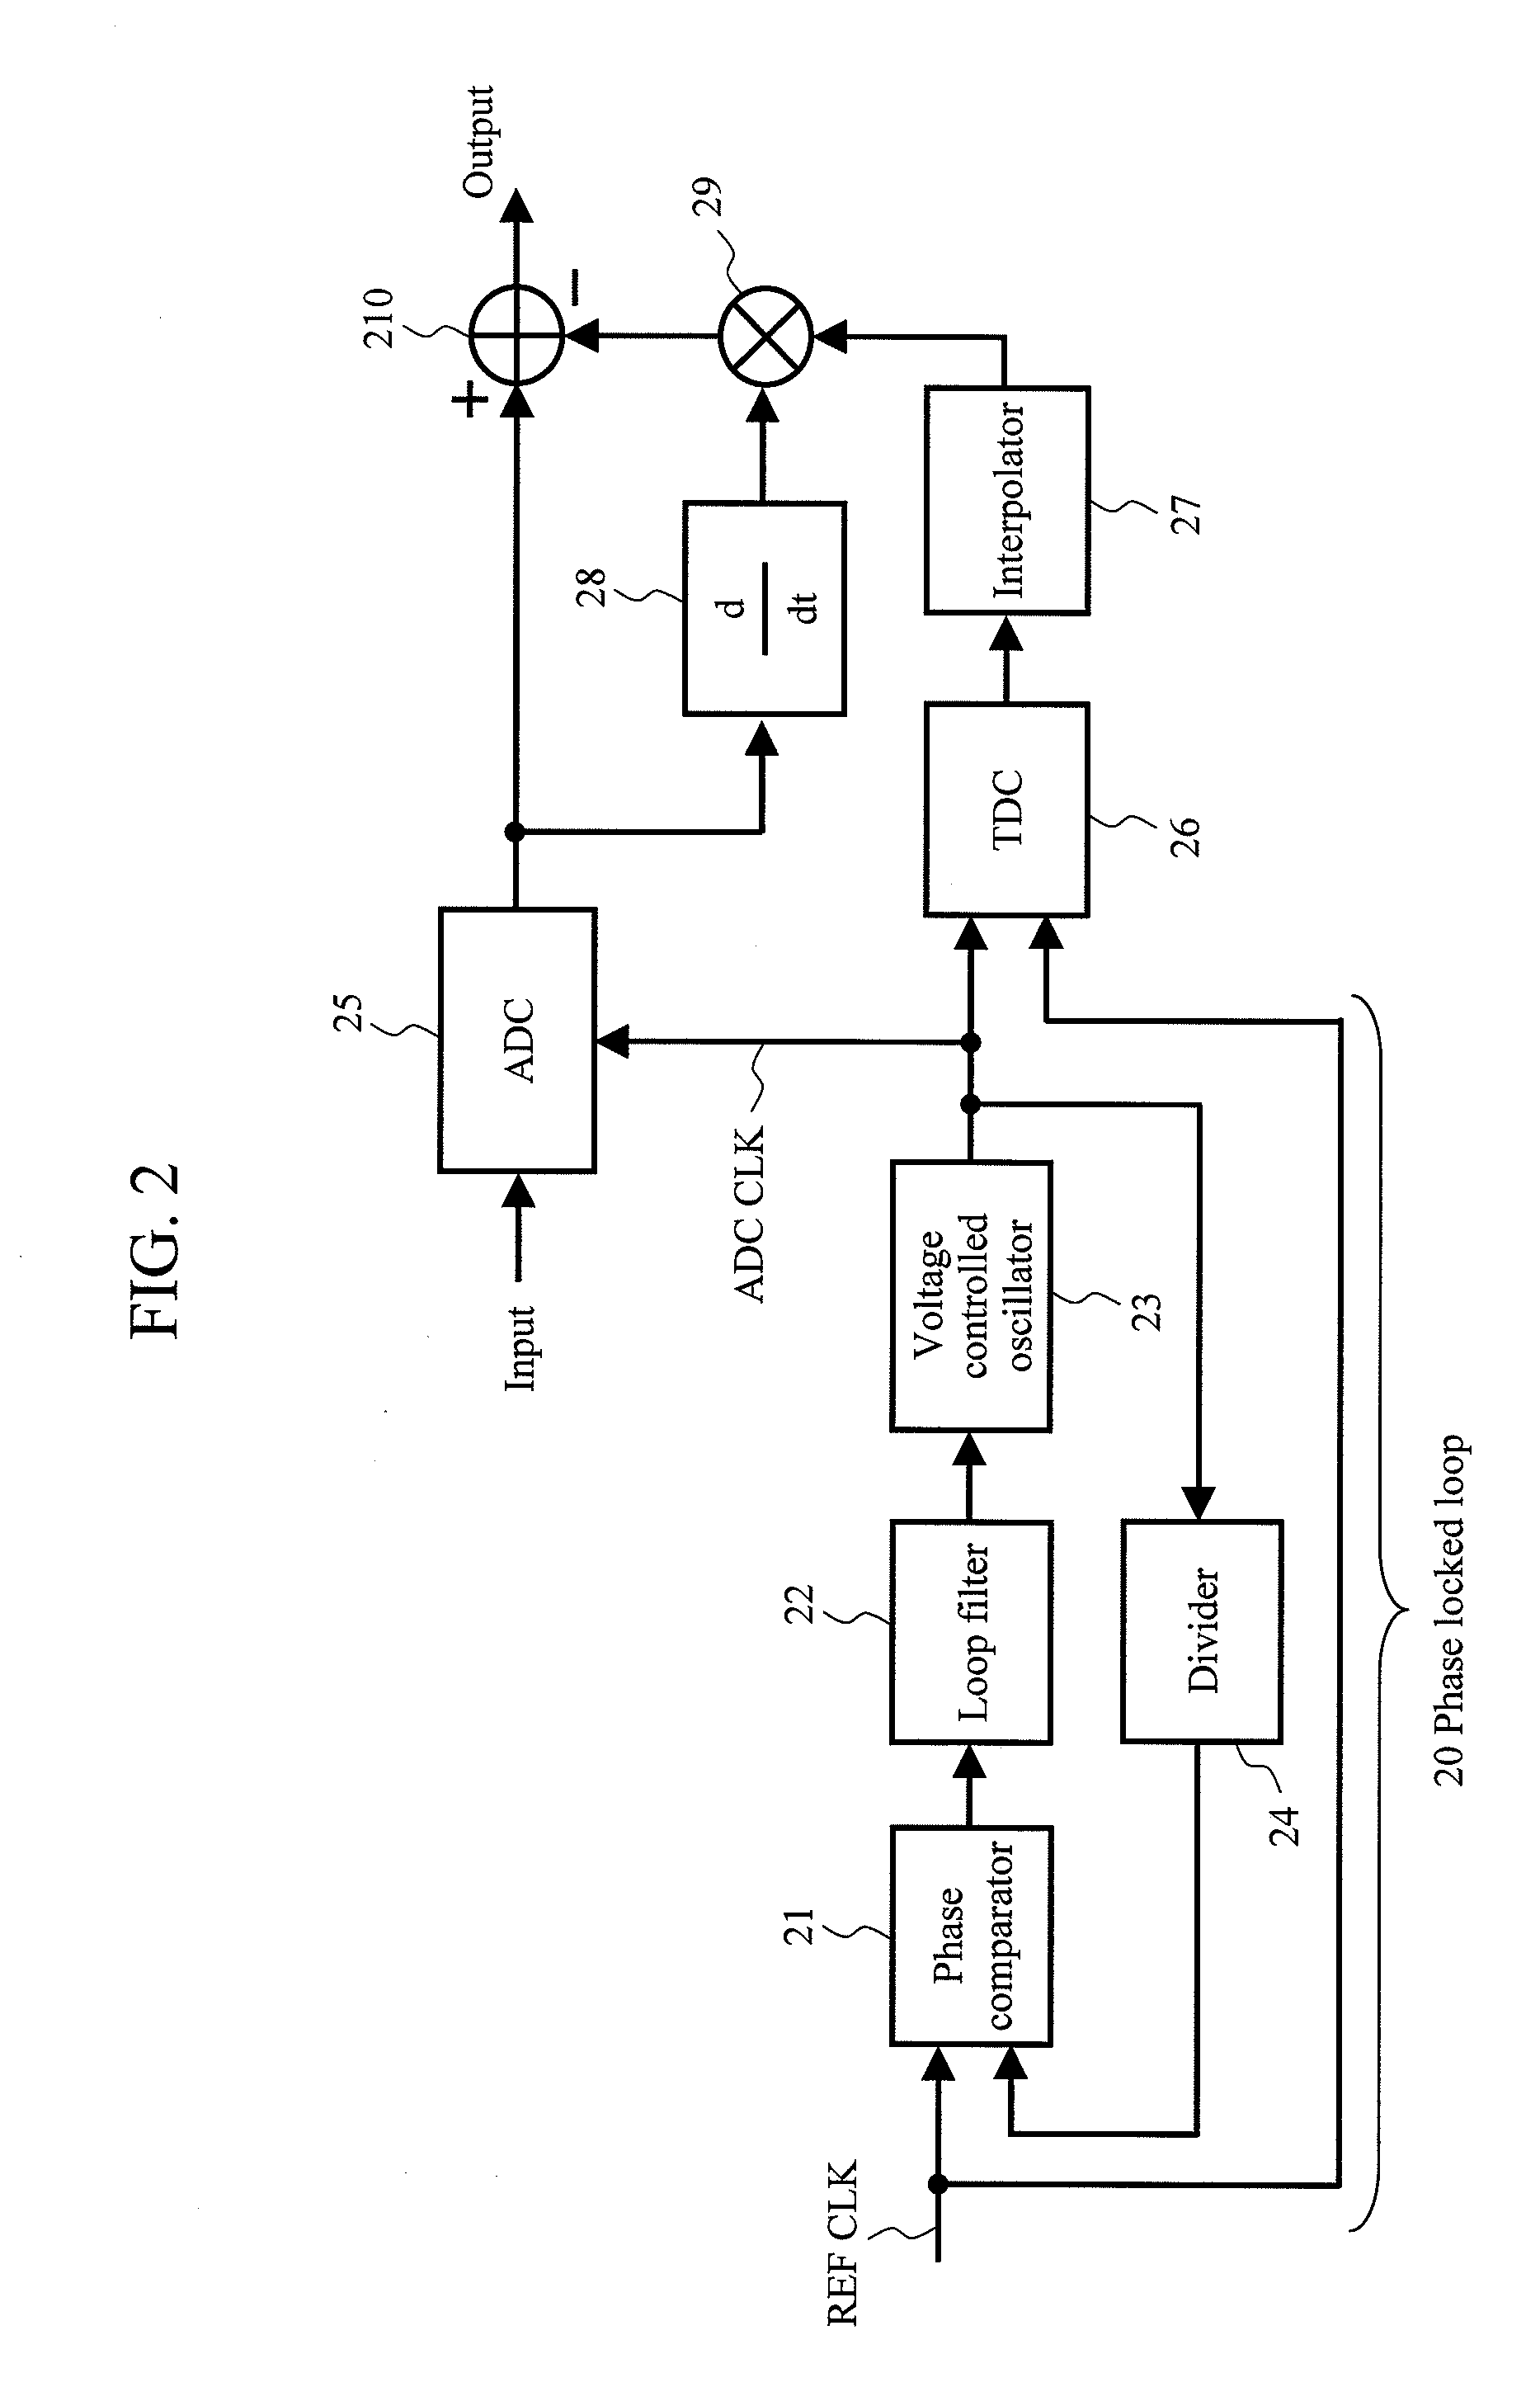 Analog-to-digital converter and wireless receiver